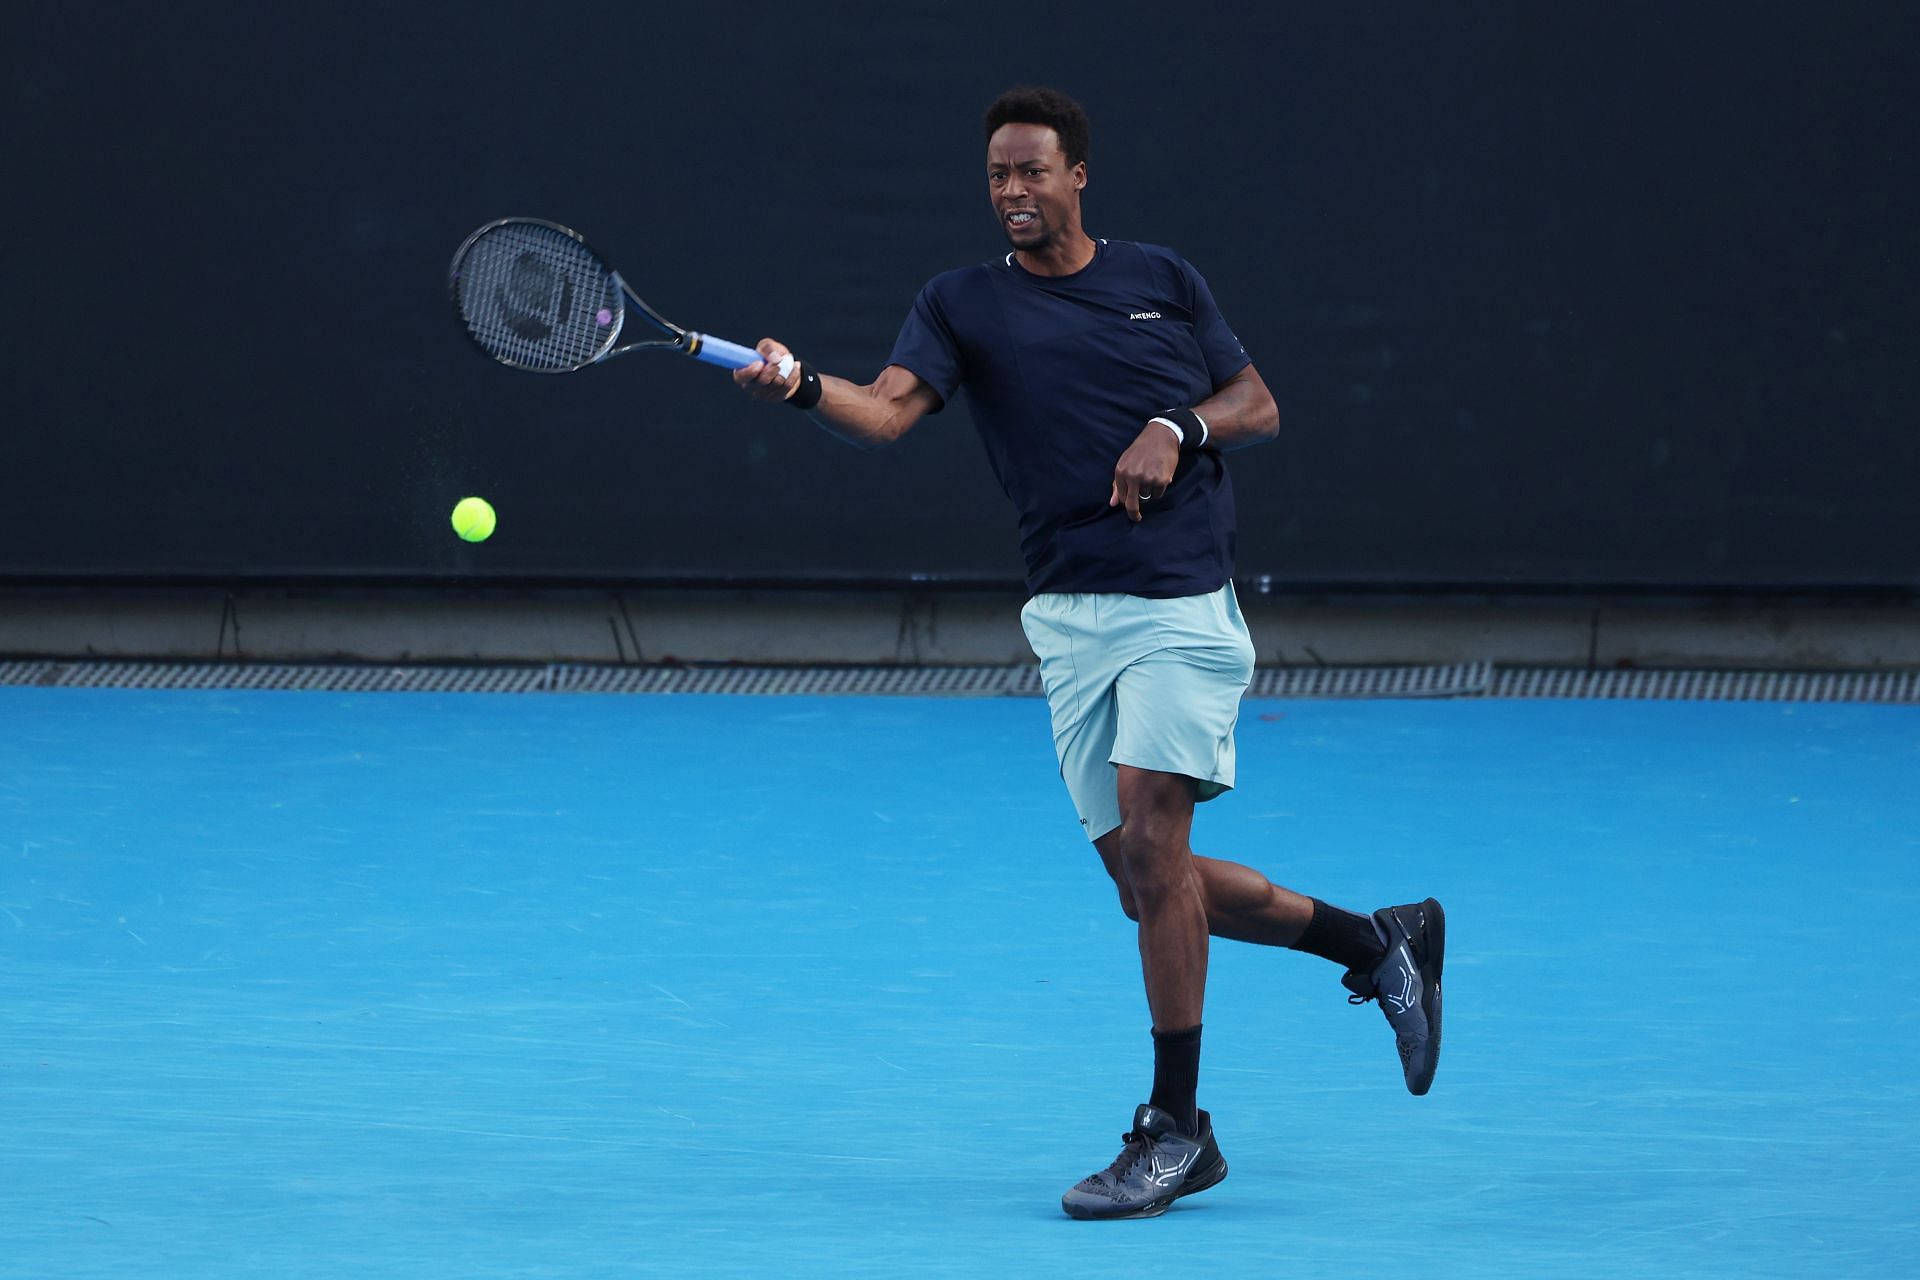 Monfils is aiming to reach his first final of the season at the Qatar Open.